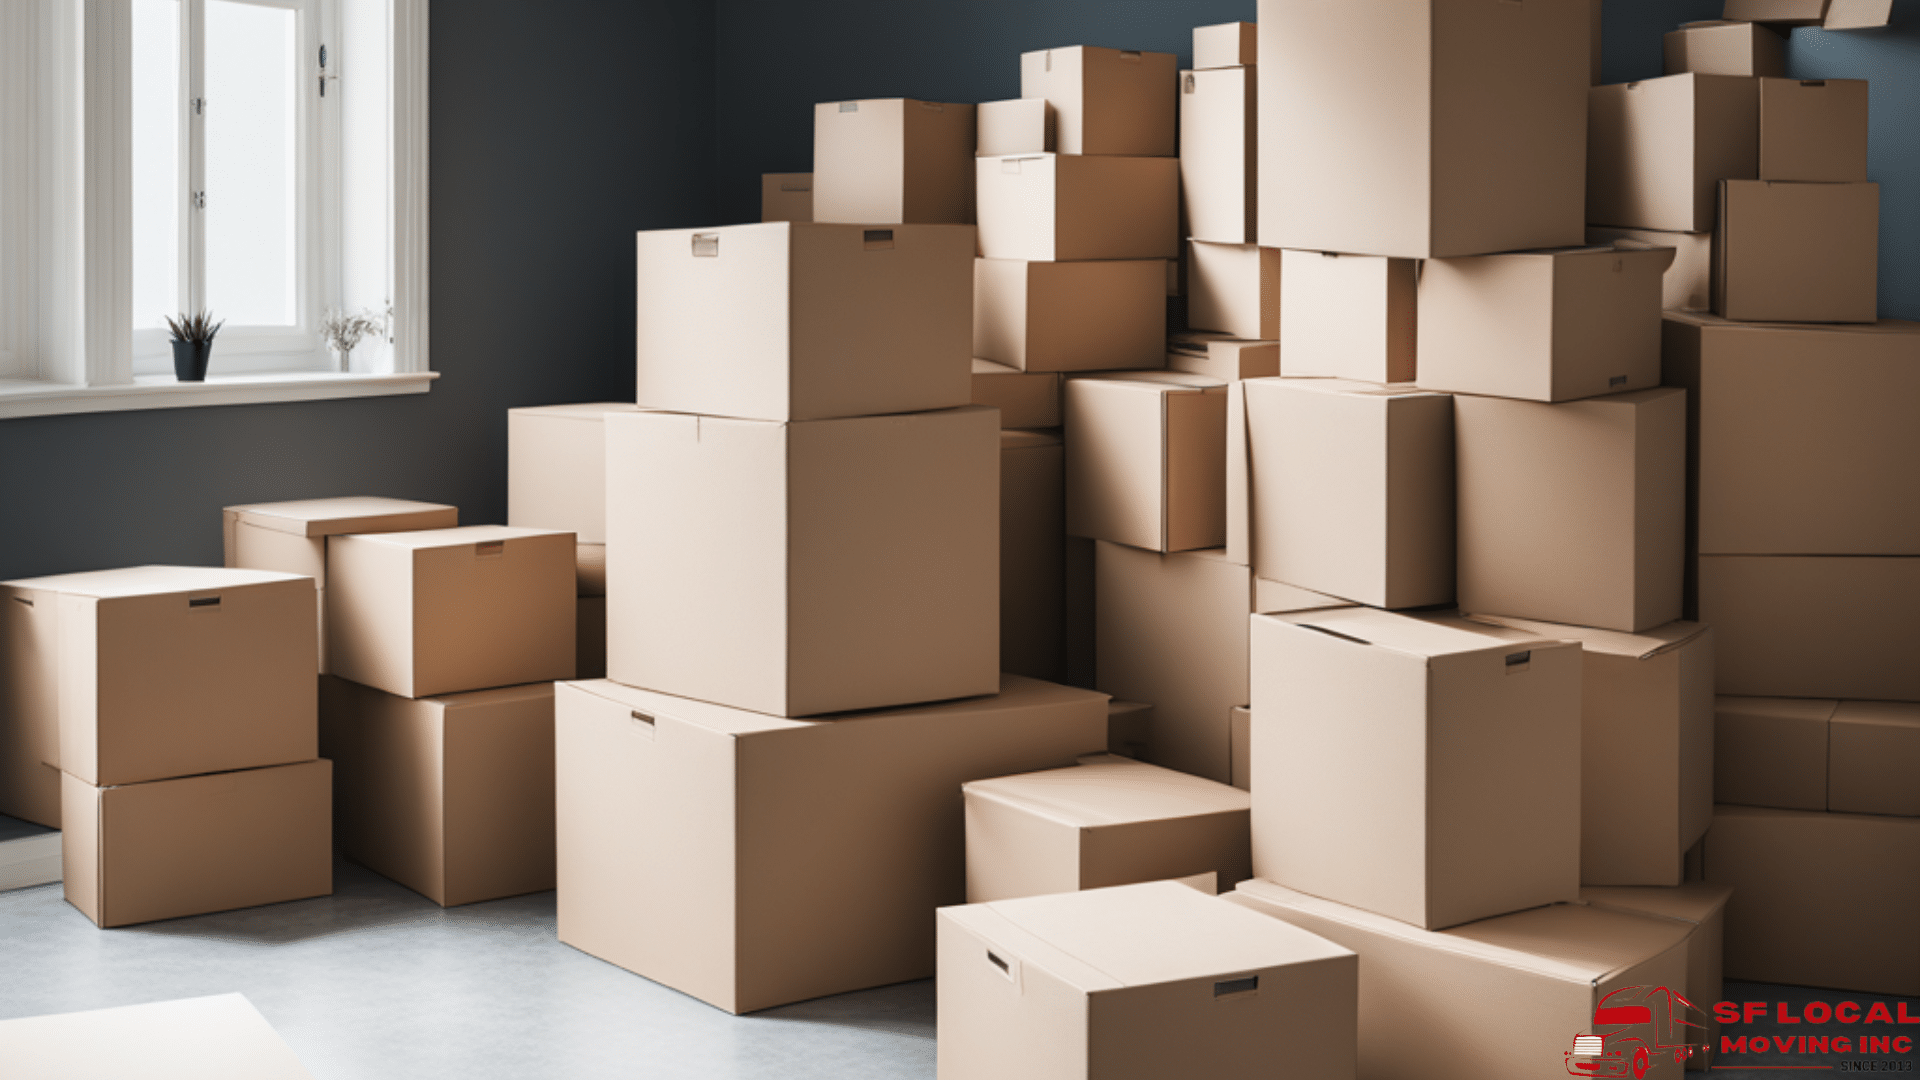 Packing and Moving Movers Companies in Miami Gardens Florida